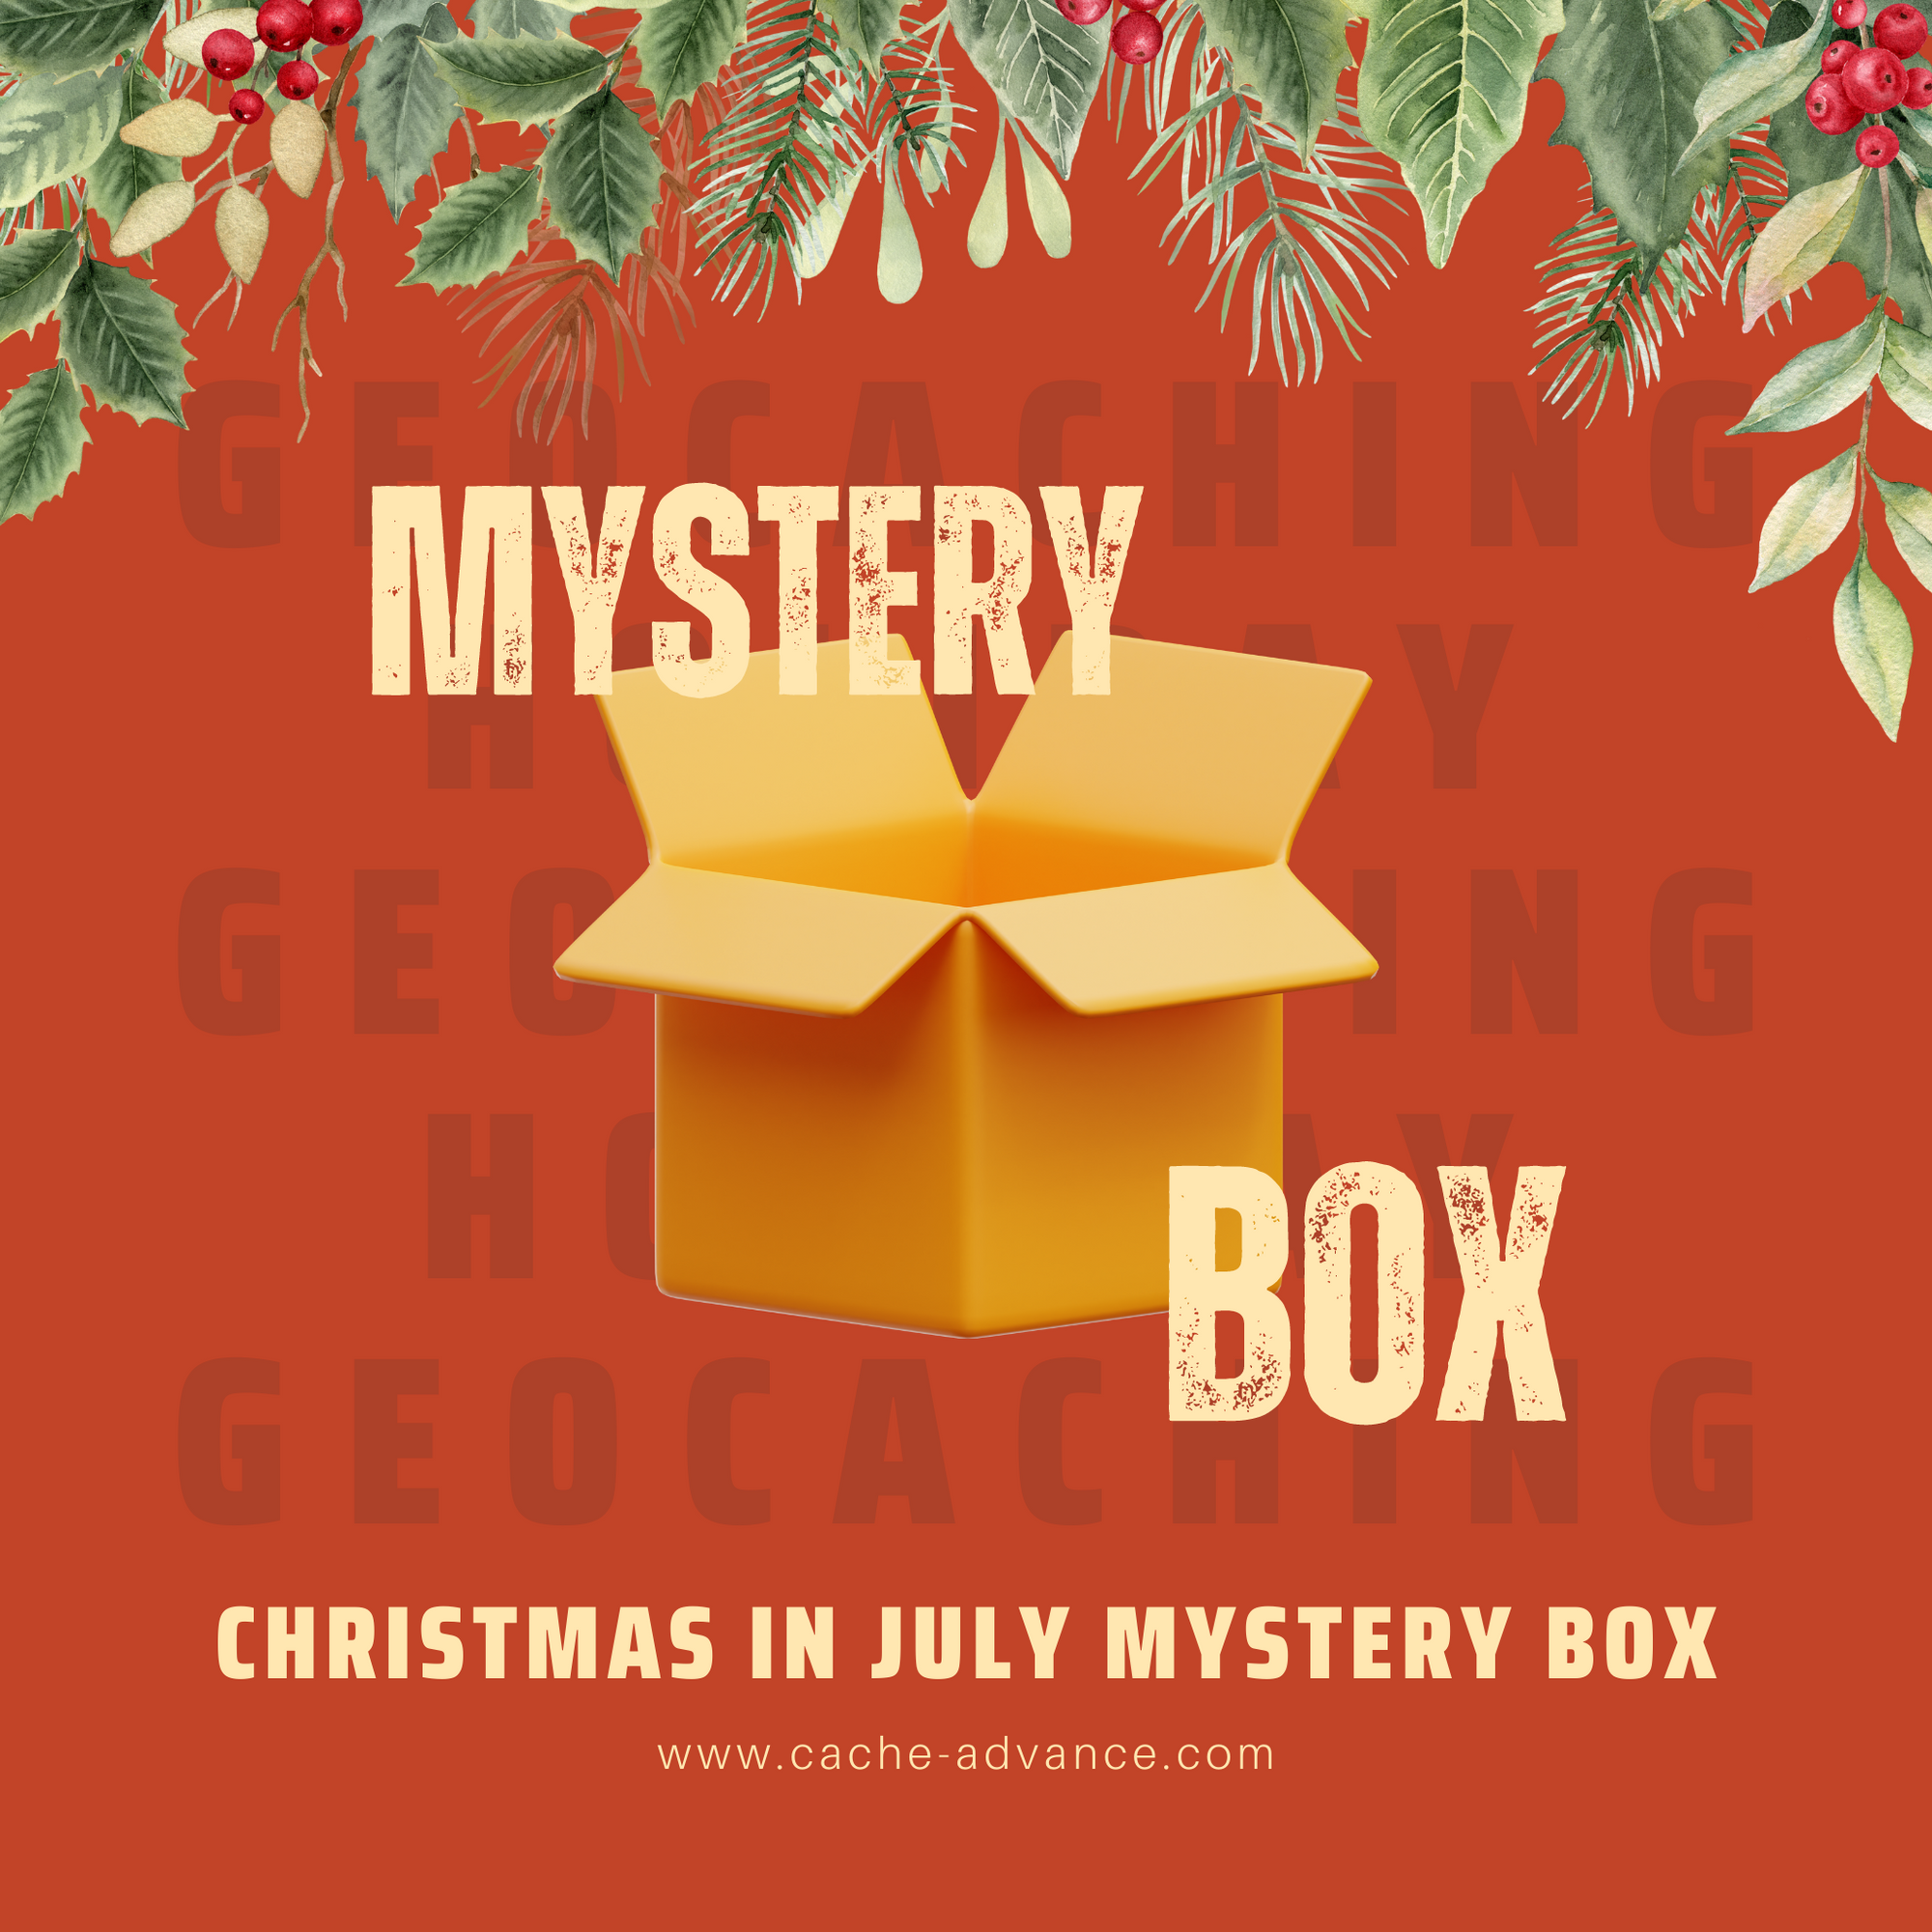 Christmas in July Mystery Box